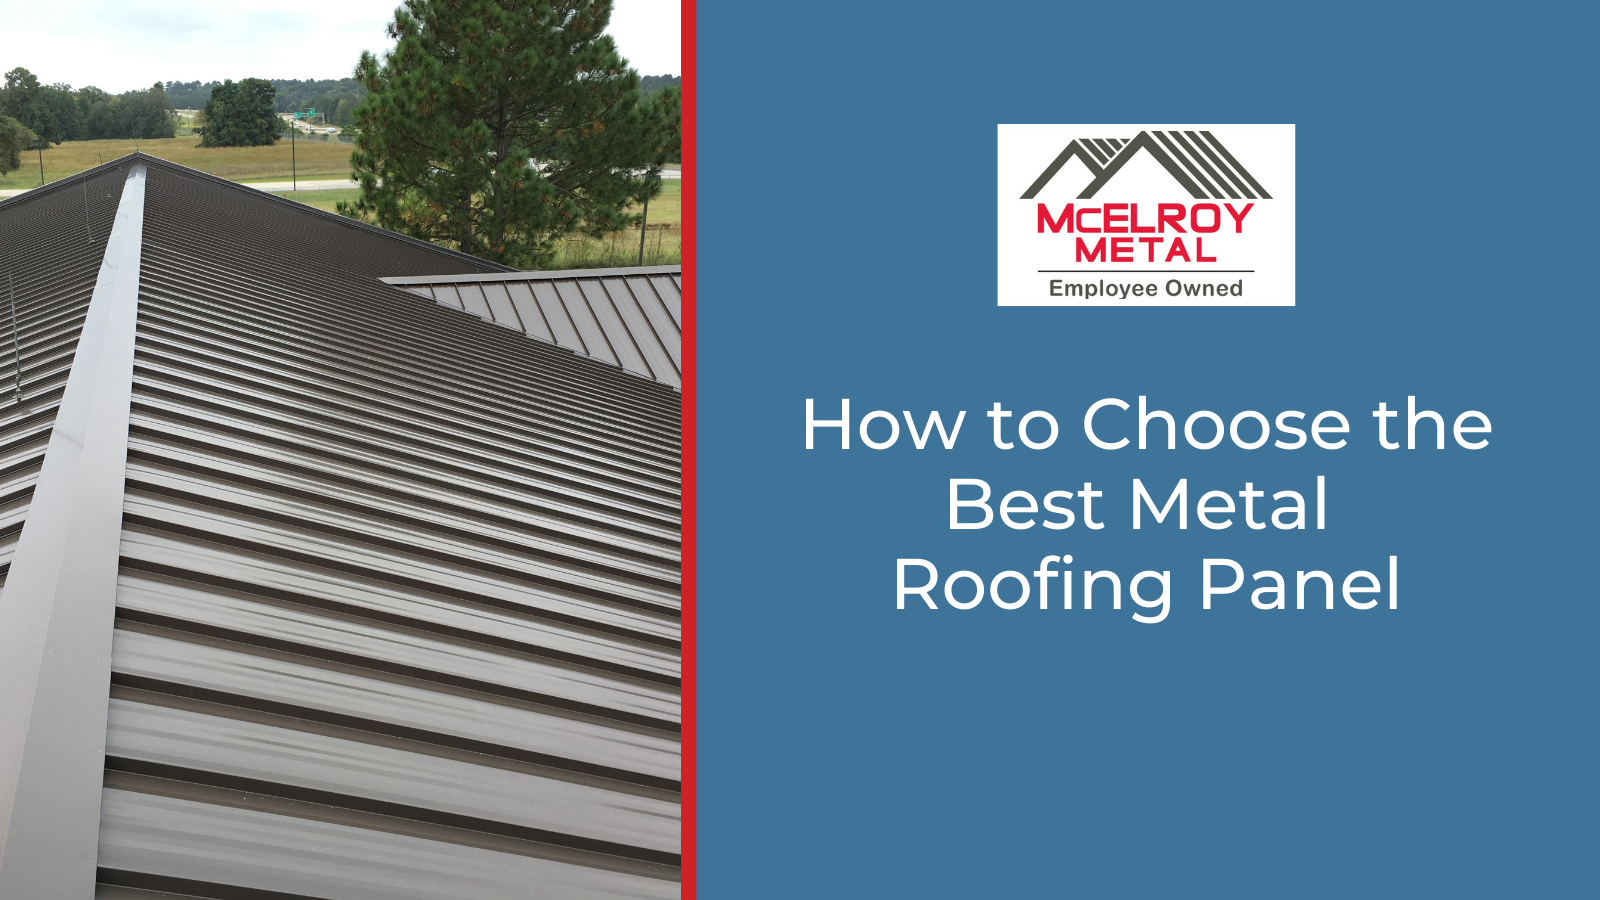 How to Choose the Best Metal Roofing Panel